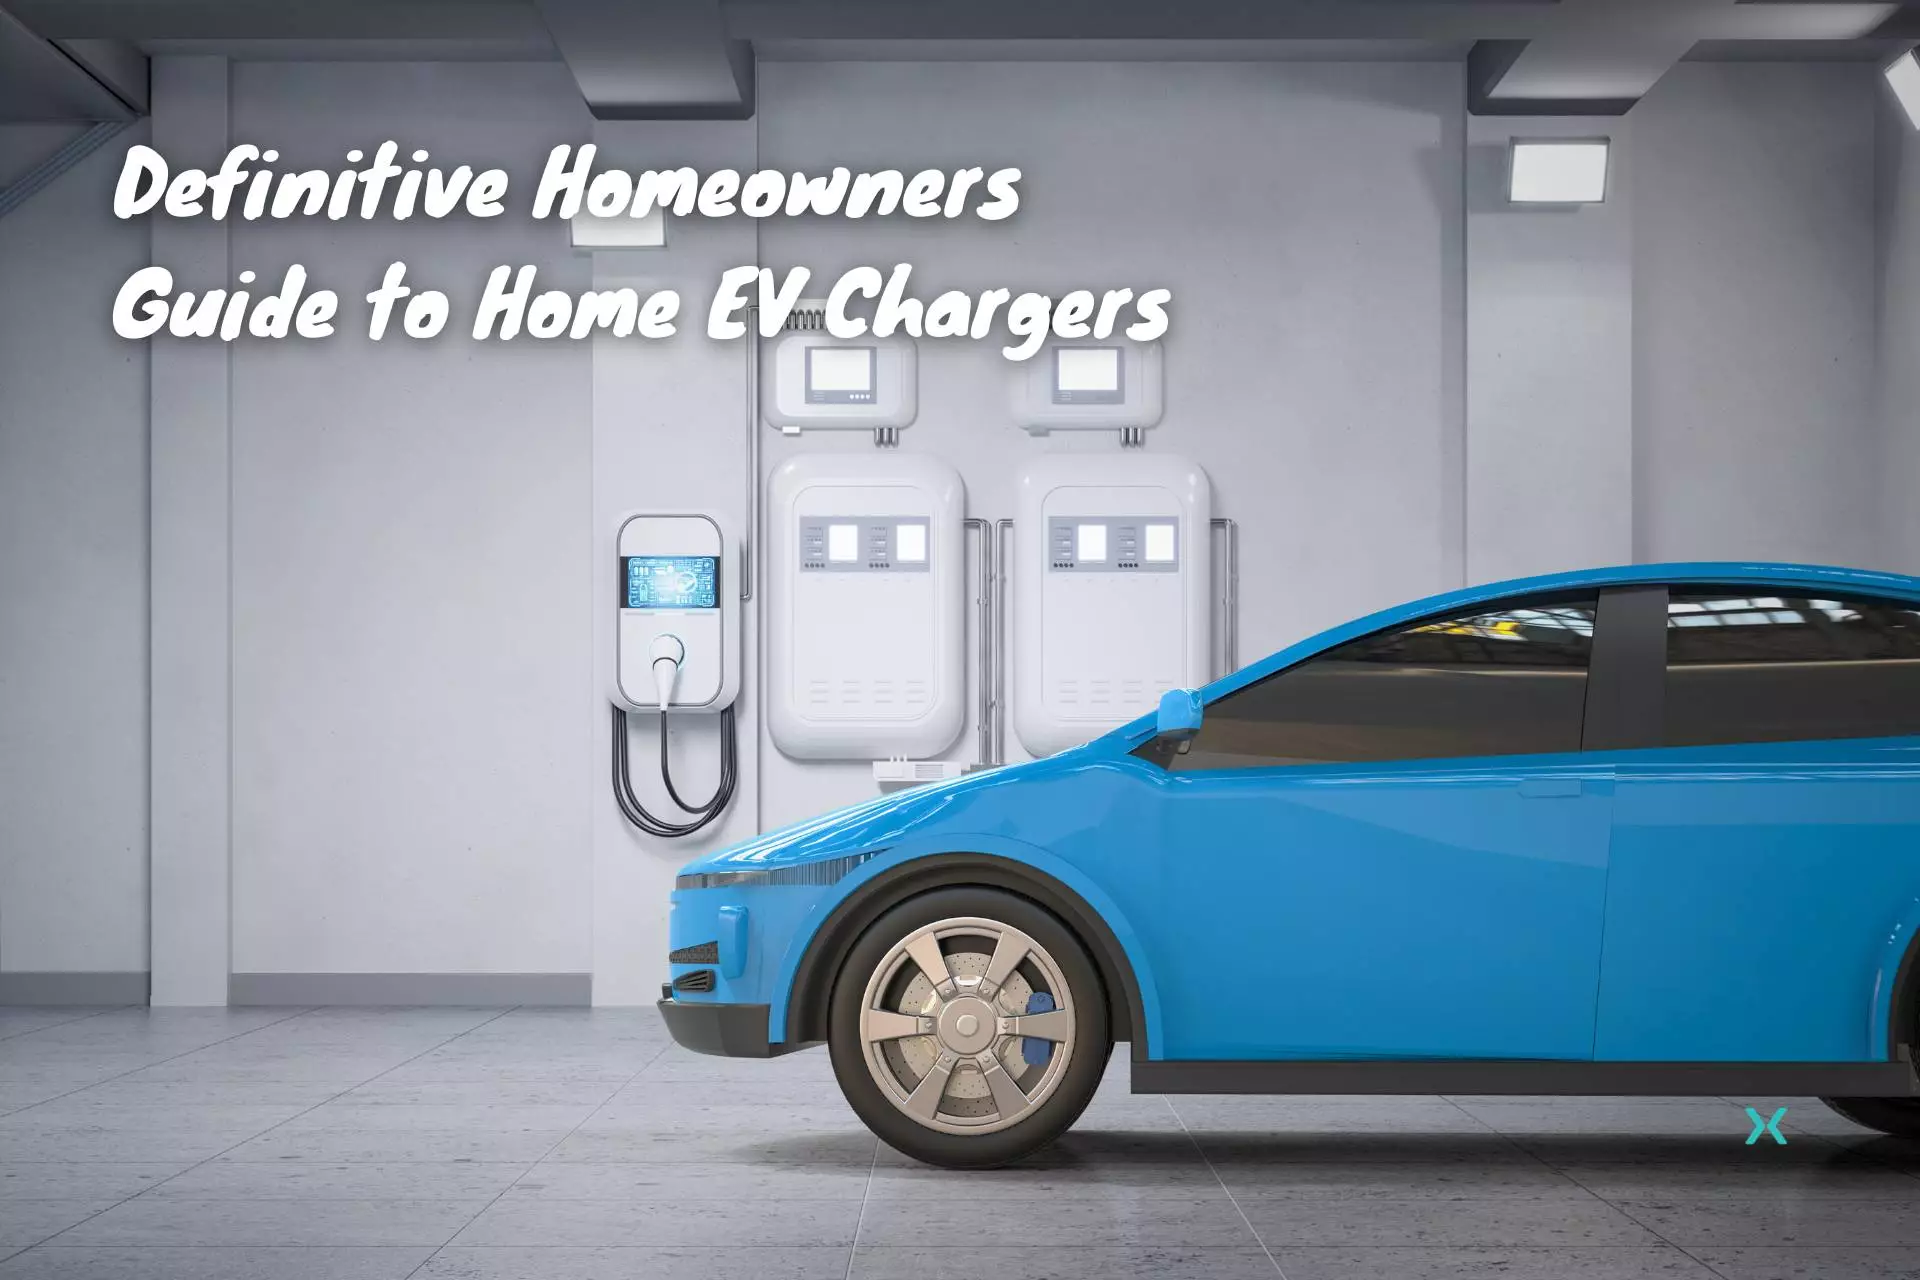 Definitive Homeowners Guide to Home EV Chargers